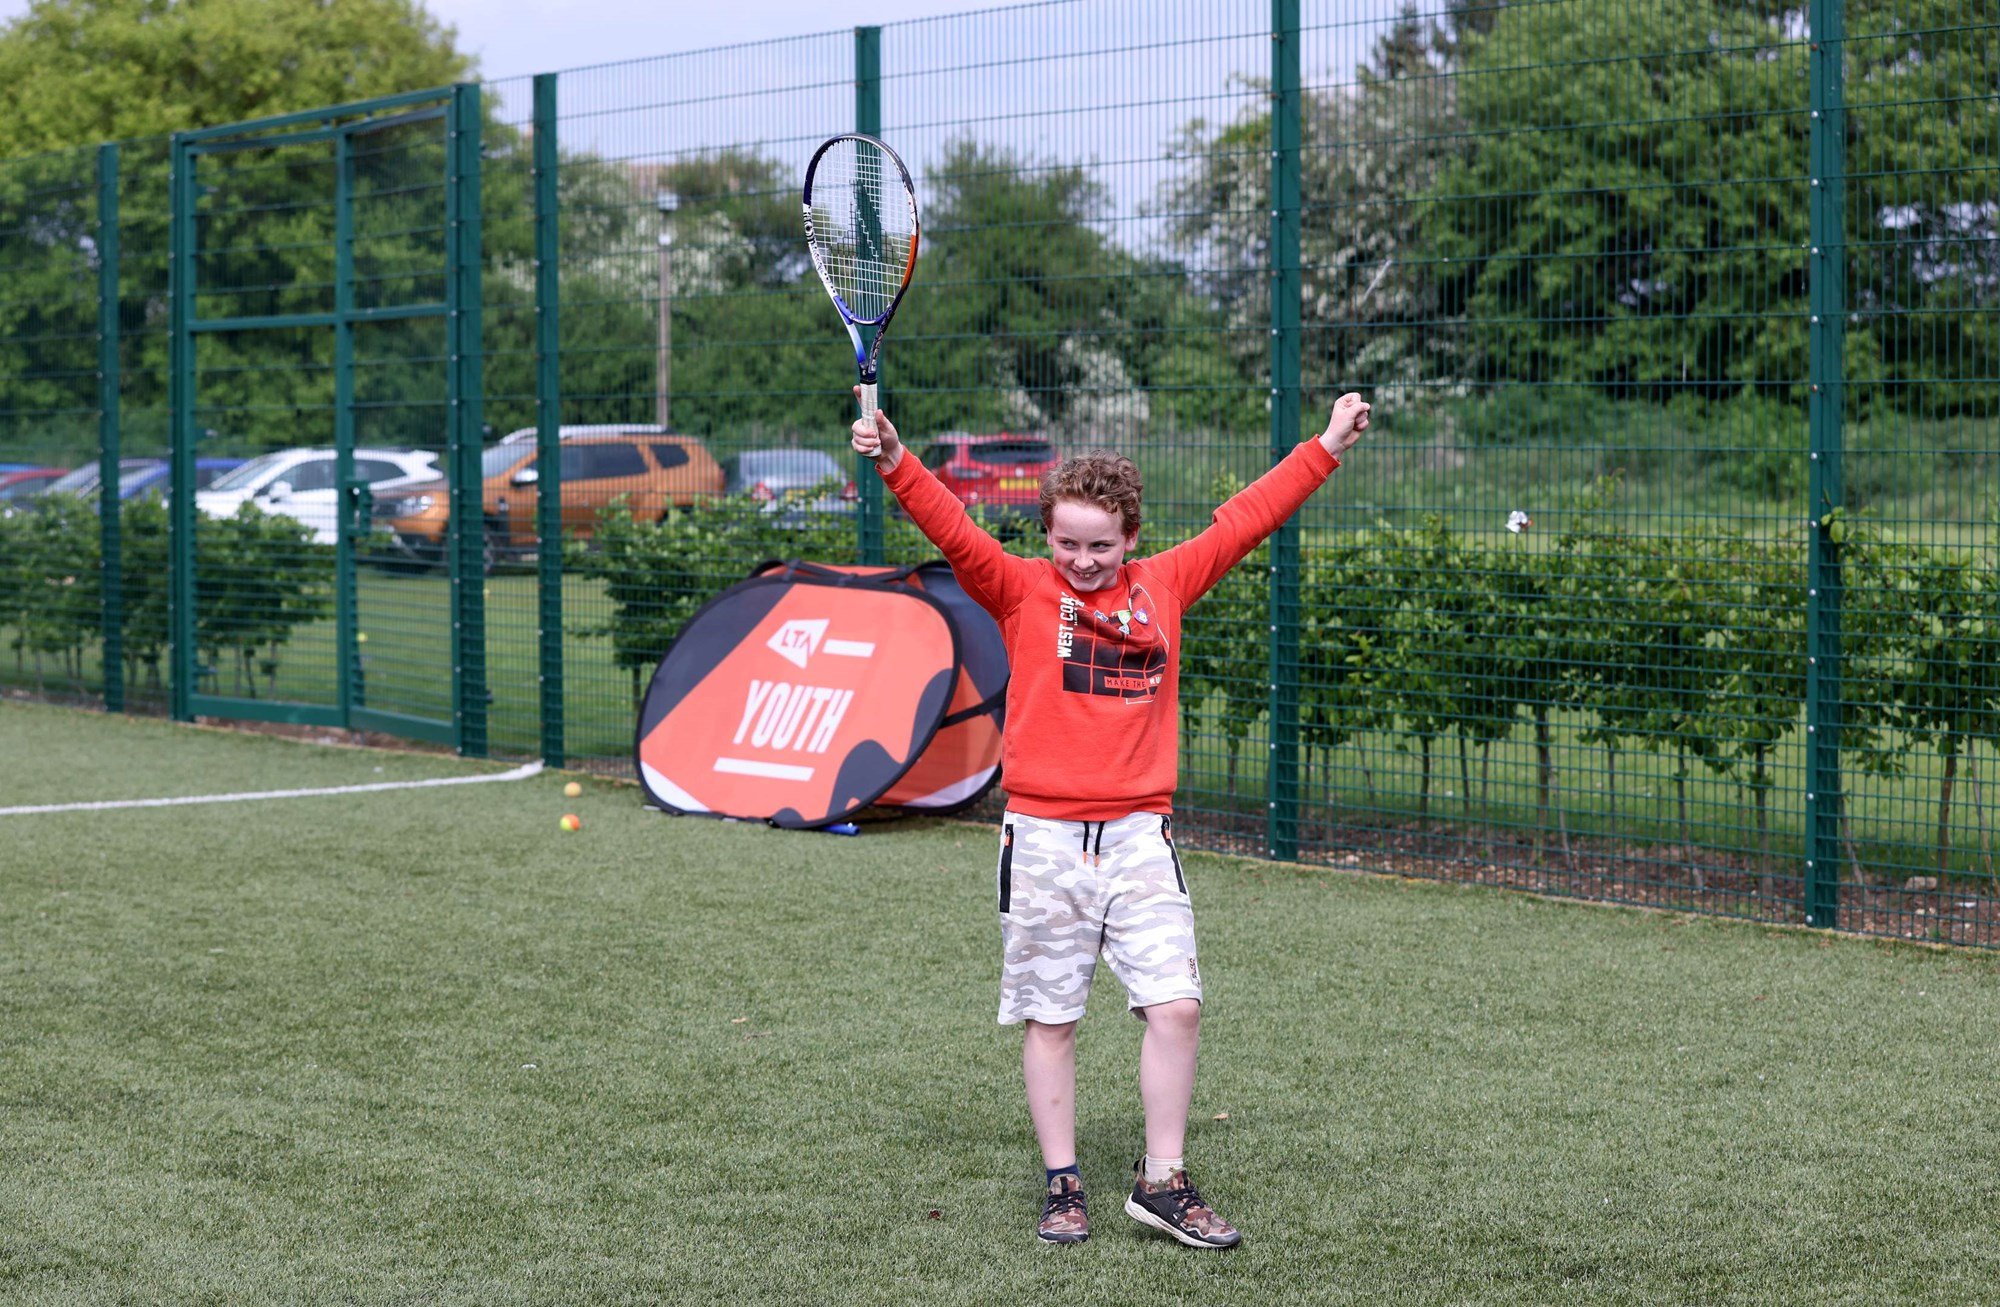 Student of Gretton Primary School celebrating during their LTA Youth Session